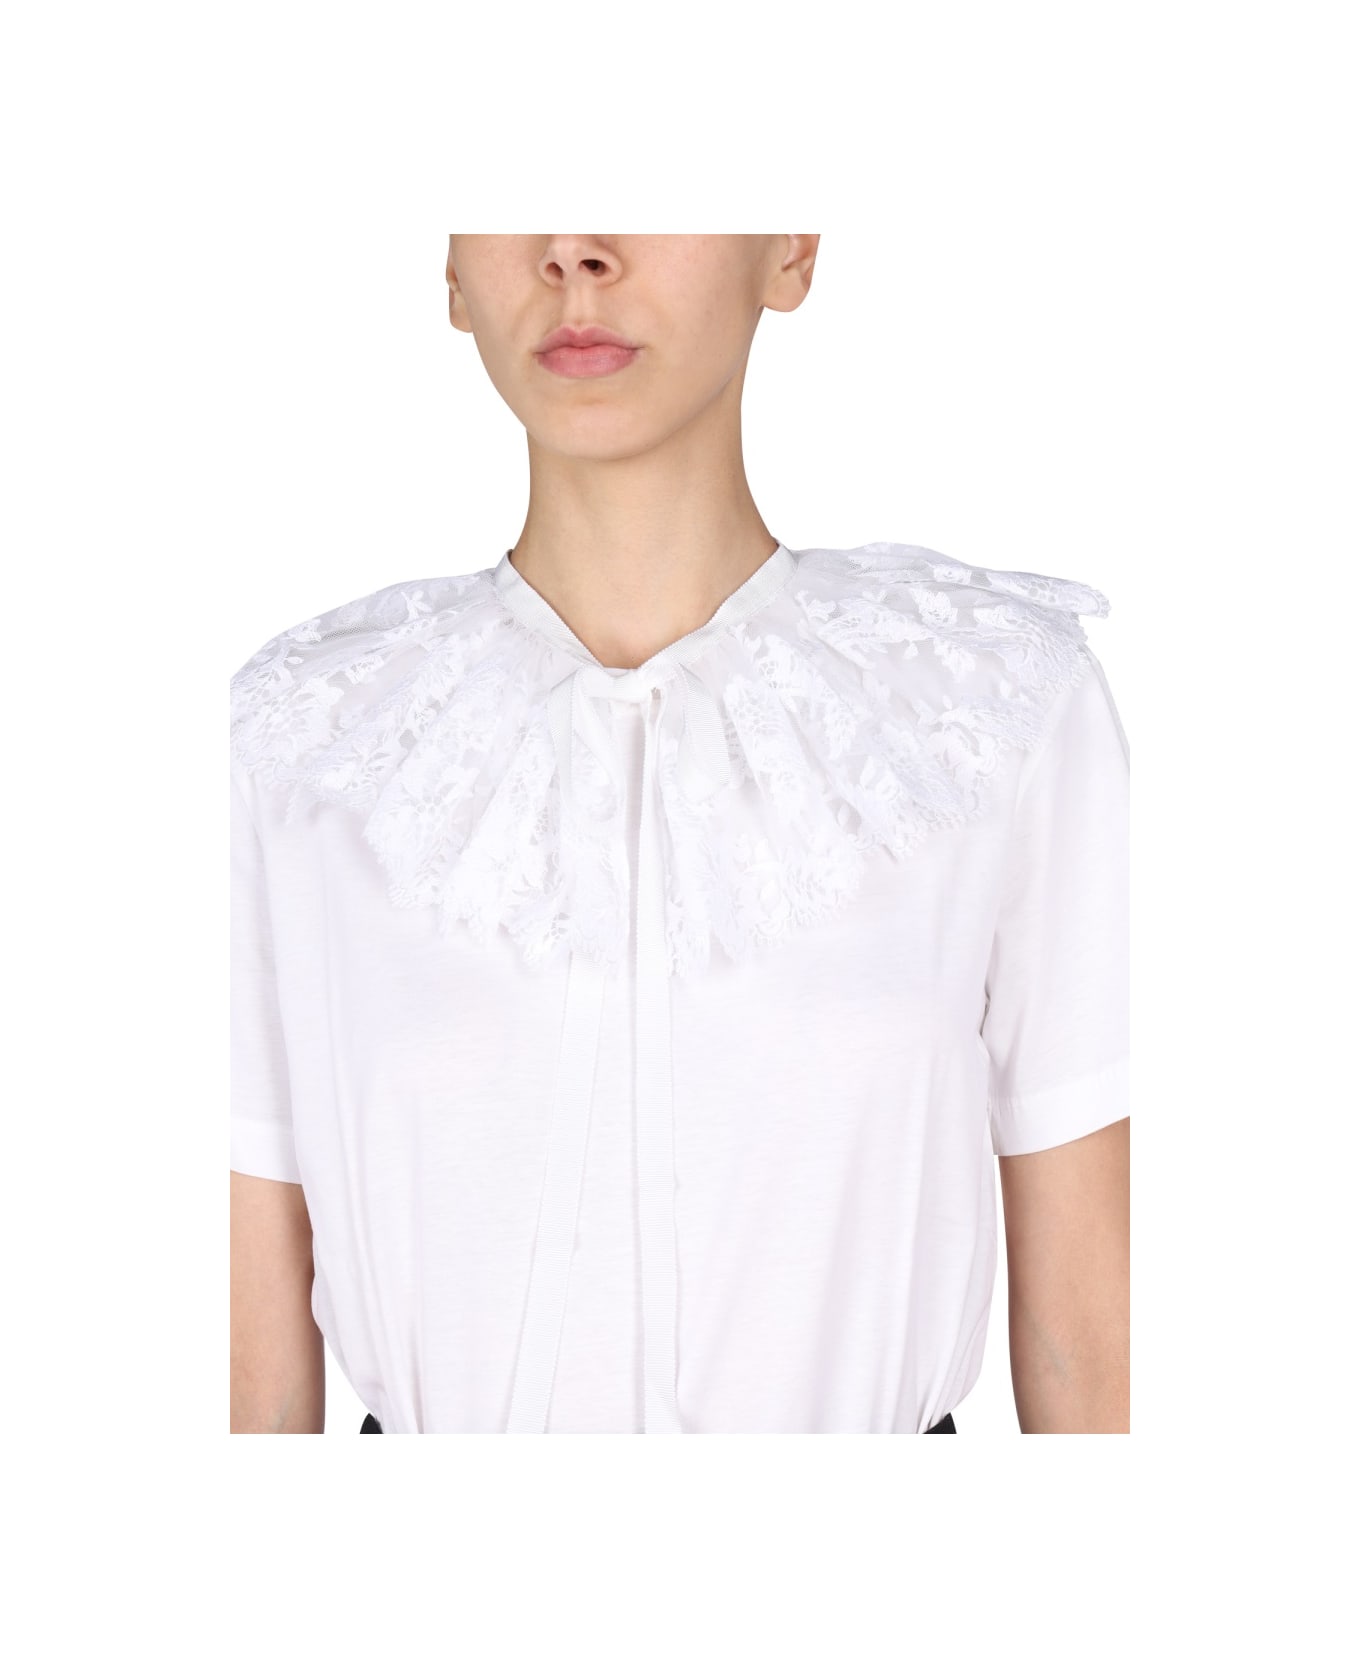 Patou Lace Embroidery T-shirt - WHITE ブラウス